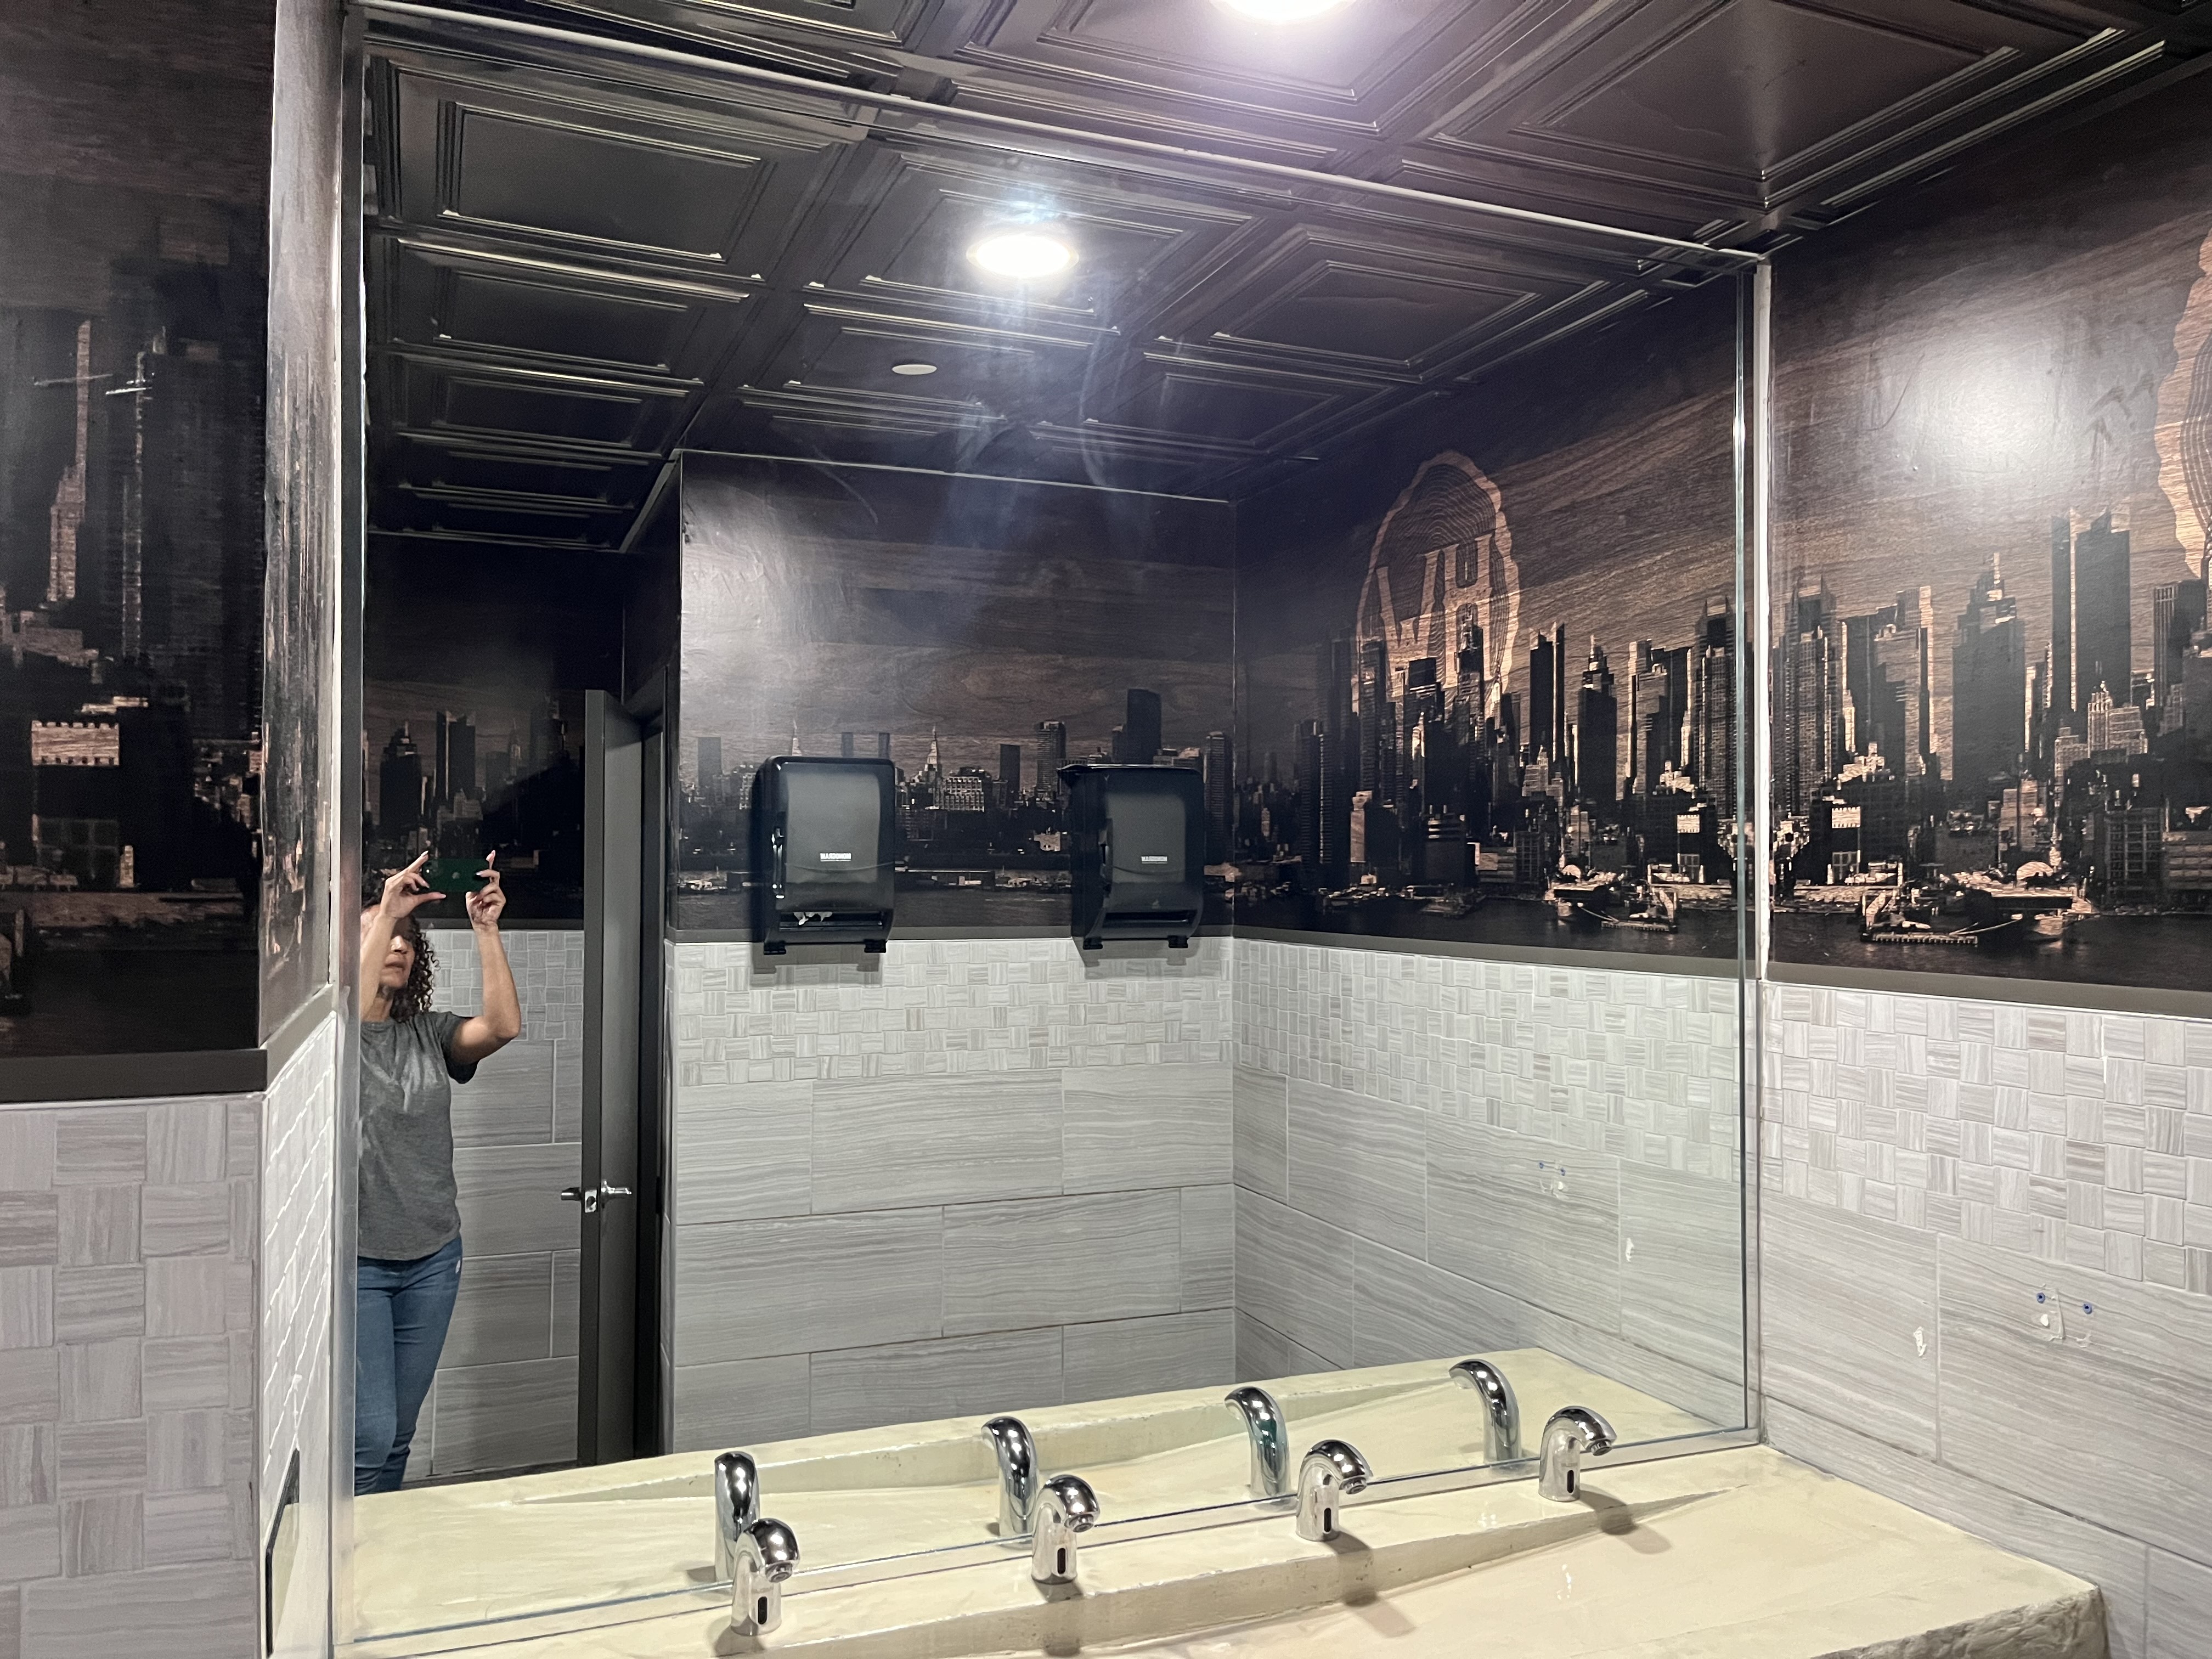 Custom Bathroom Mirror with a Chrome Frame for a Restaurant in Edgewater, New Jersey Image